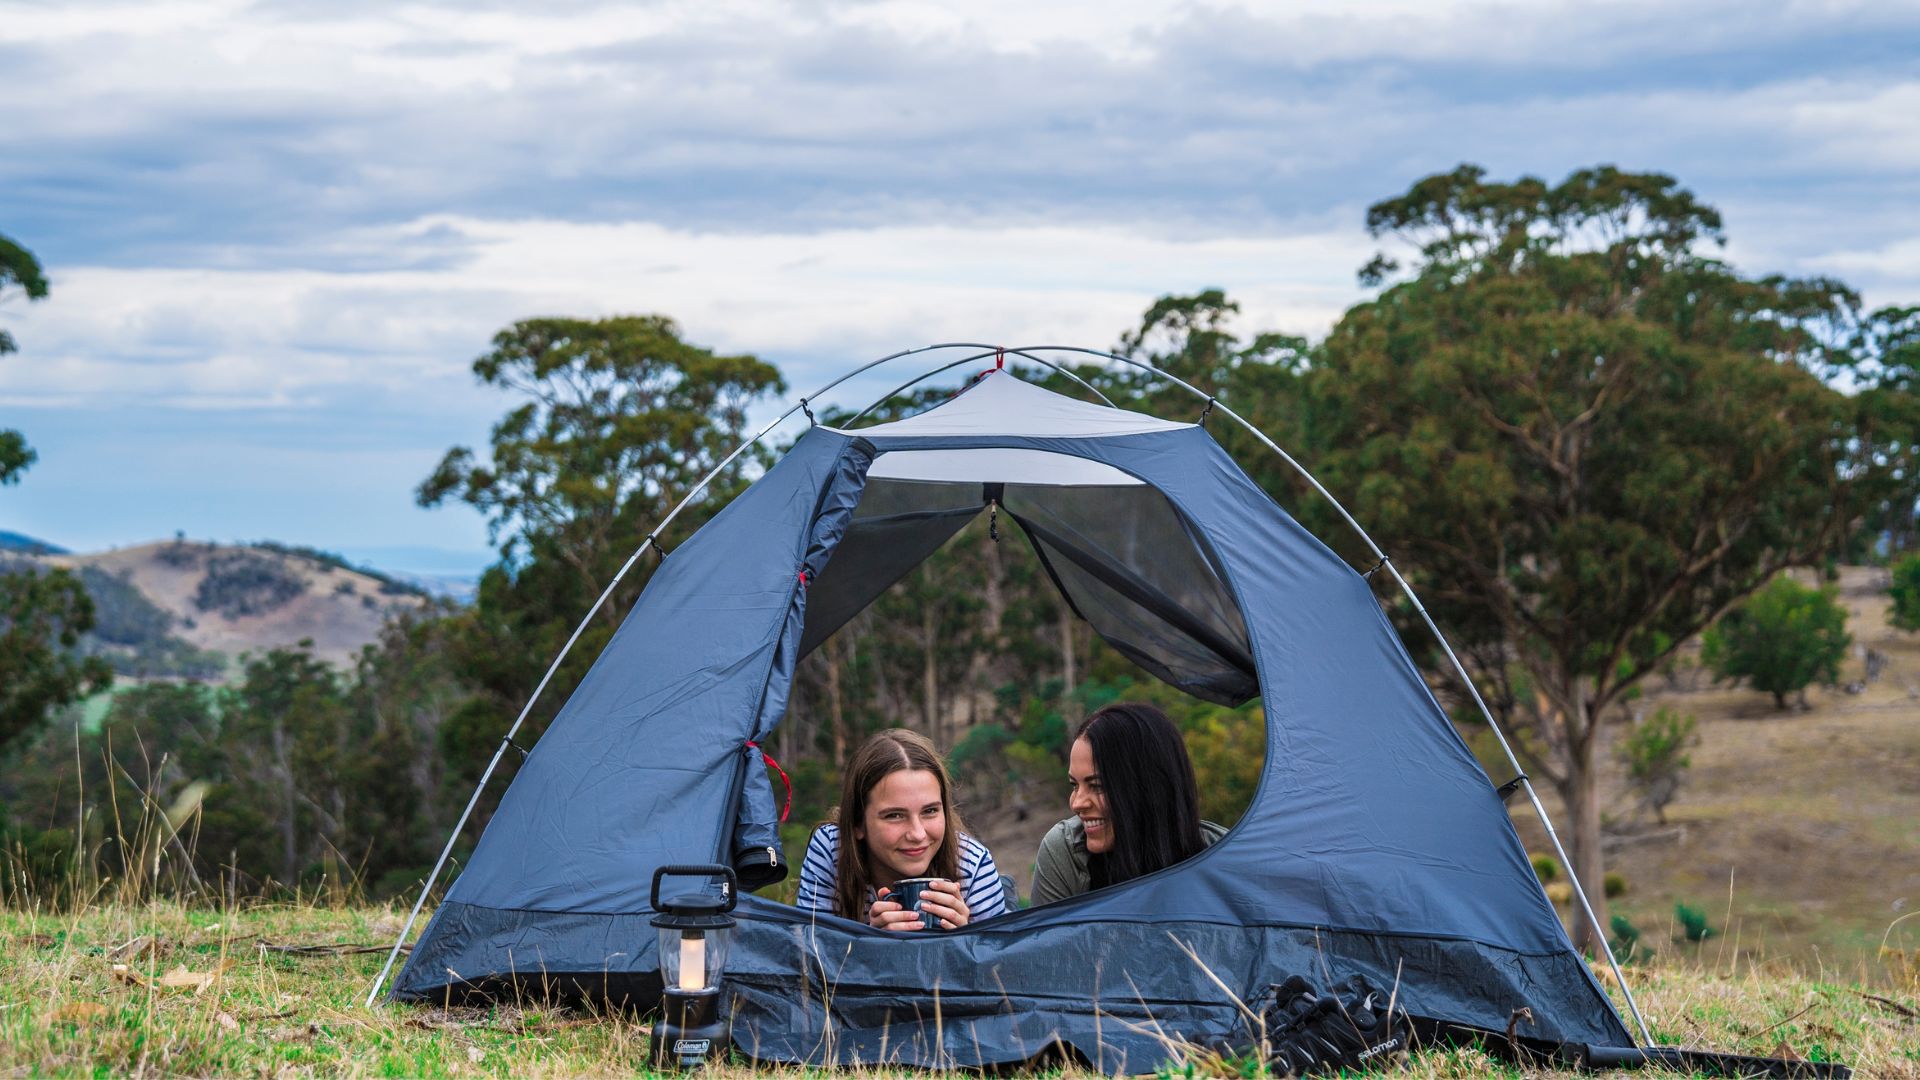 The Best Spots For Camping In Tasmania